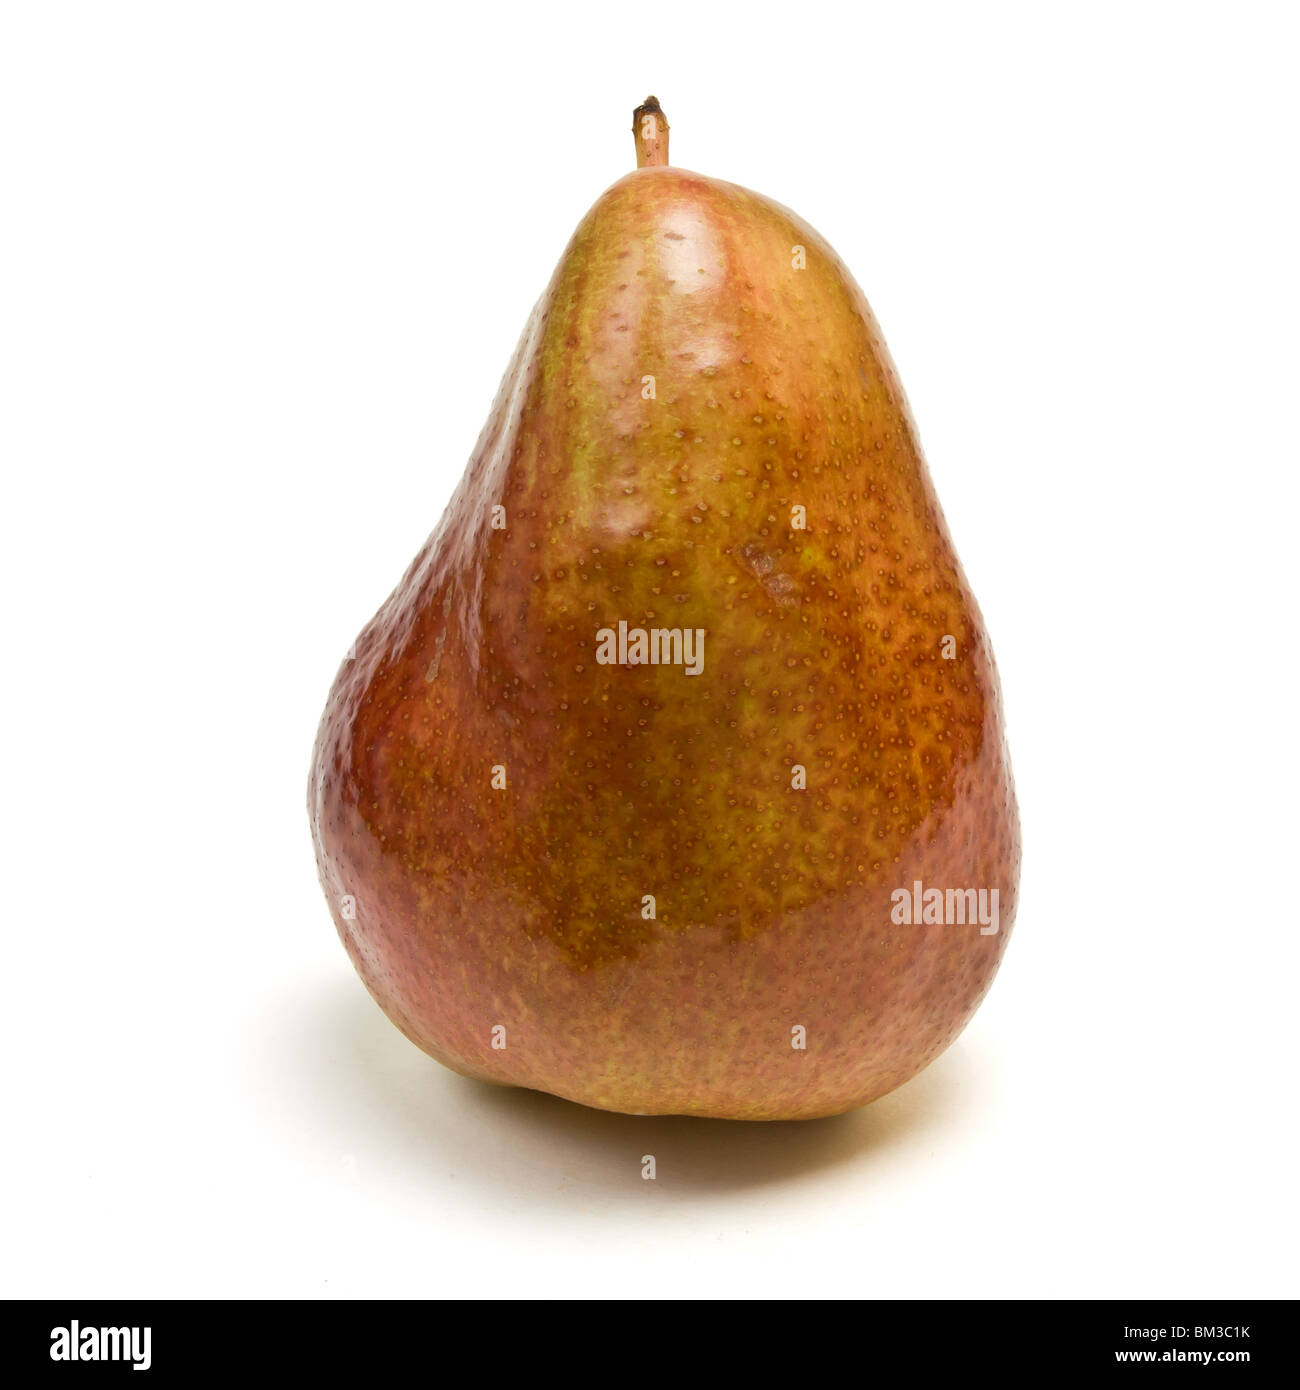 Red Bartlett Pear from low perspective isolated against white background. Stock Photo